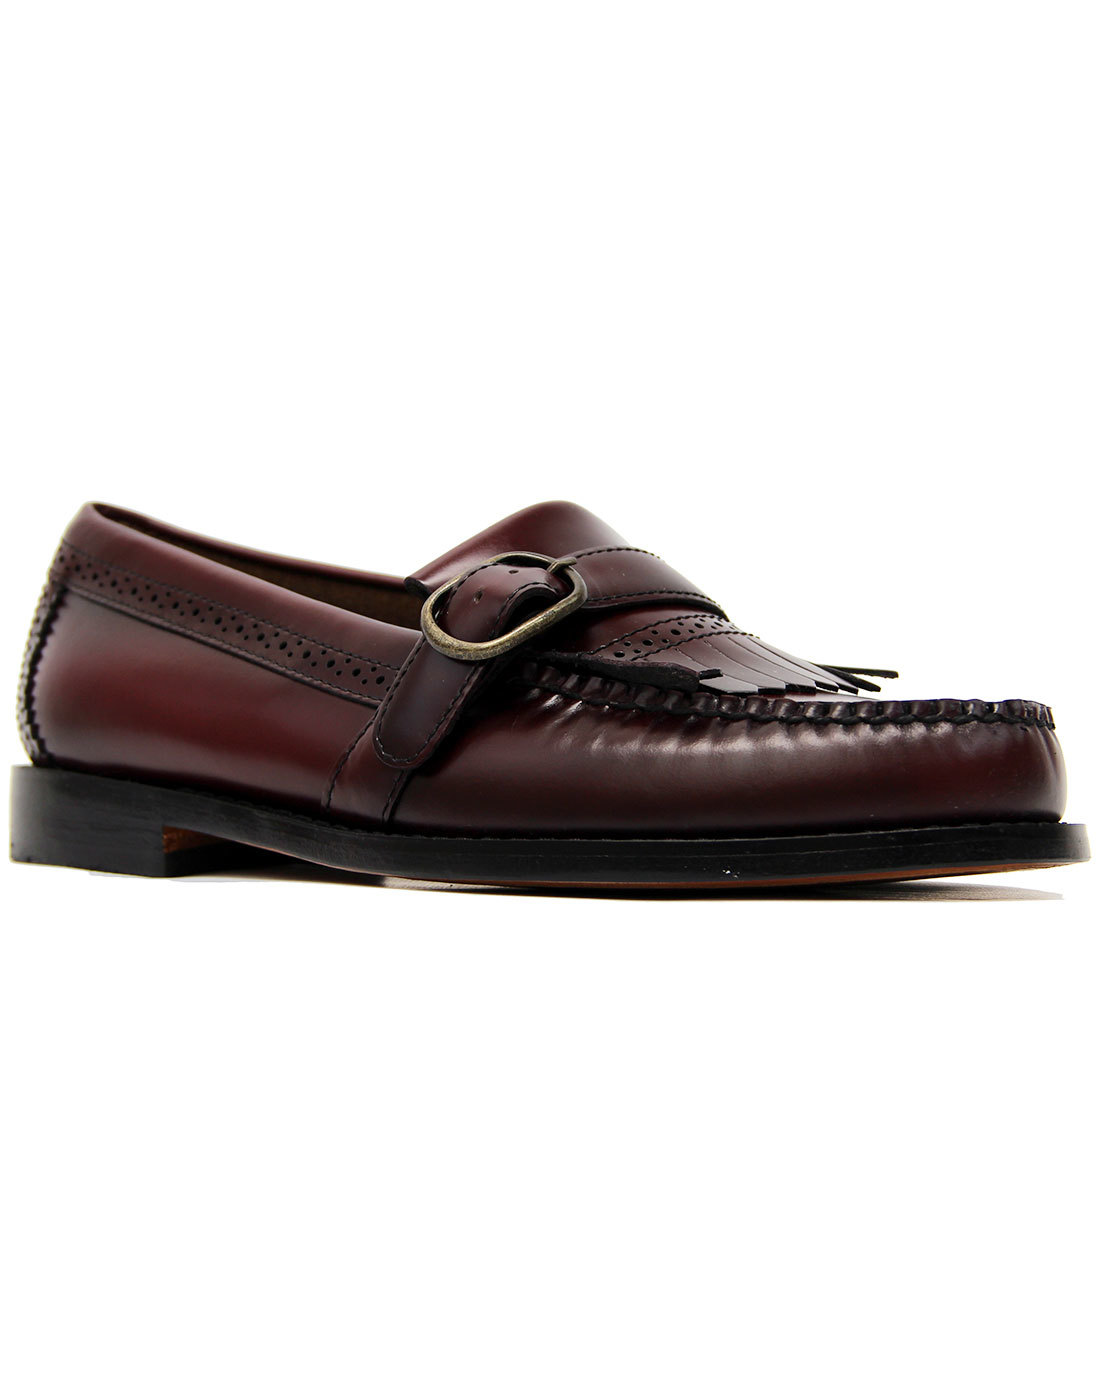 BASS WEEJUNS Langley 60s Buckle Loafers in Wine